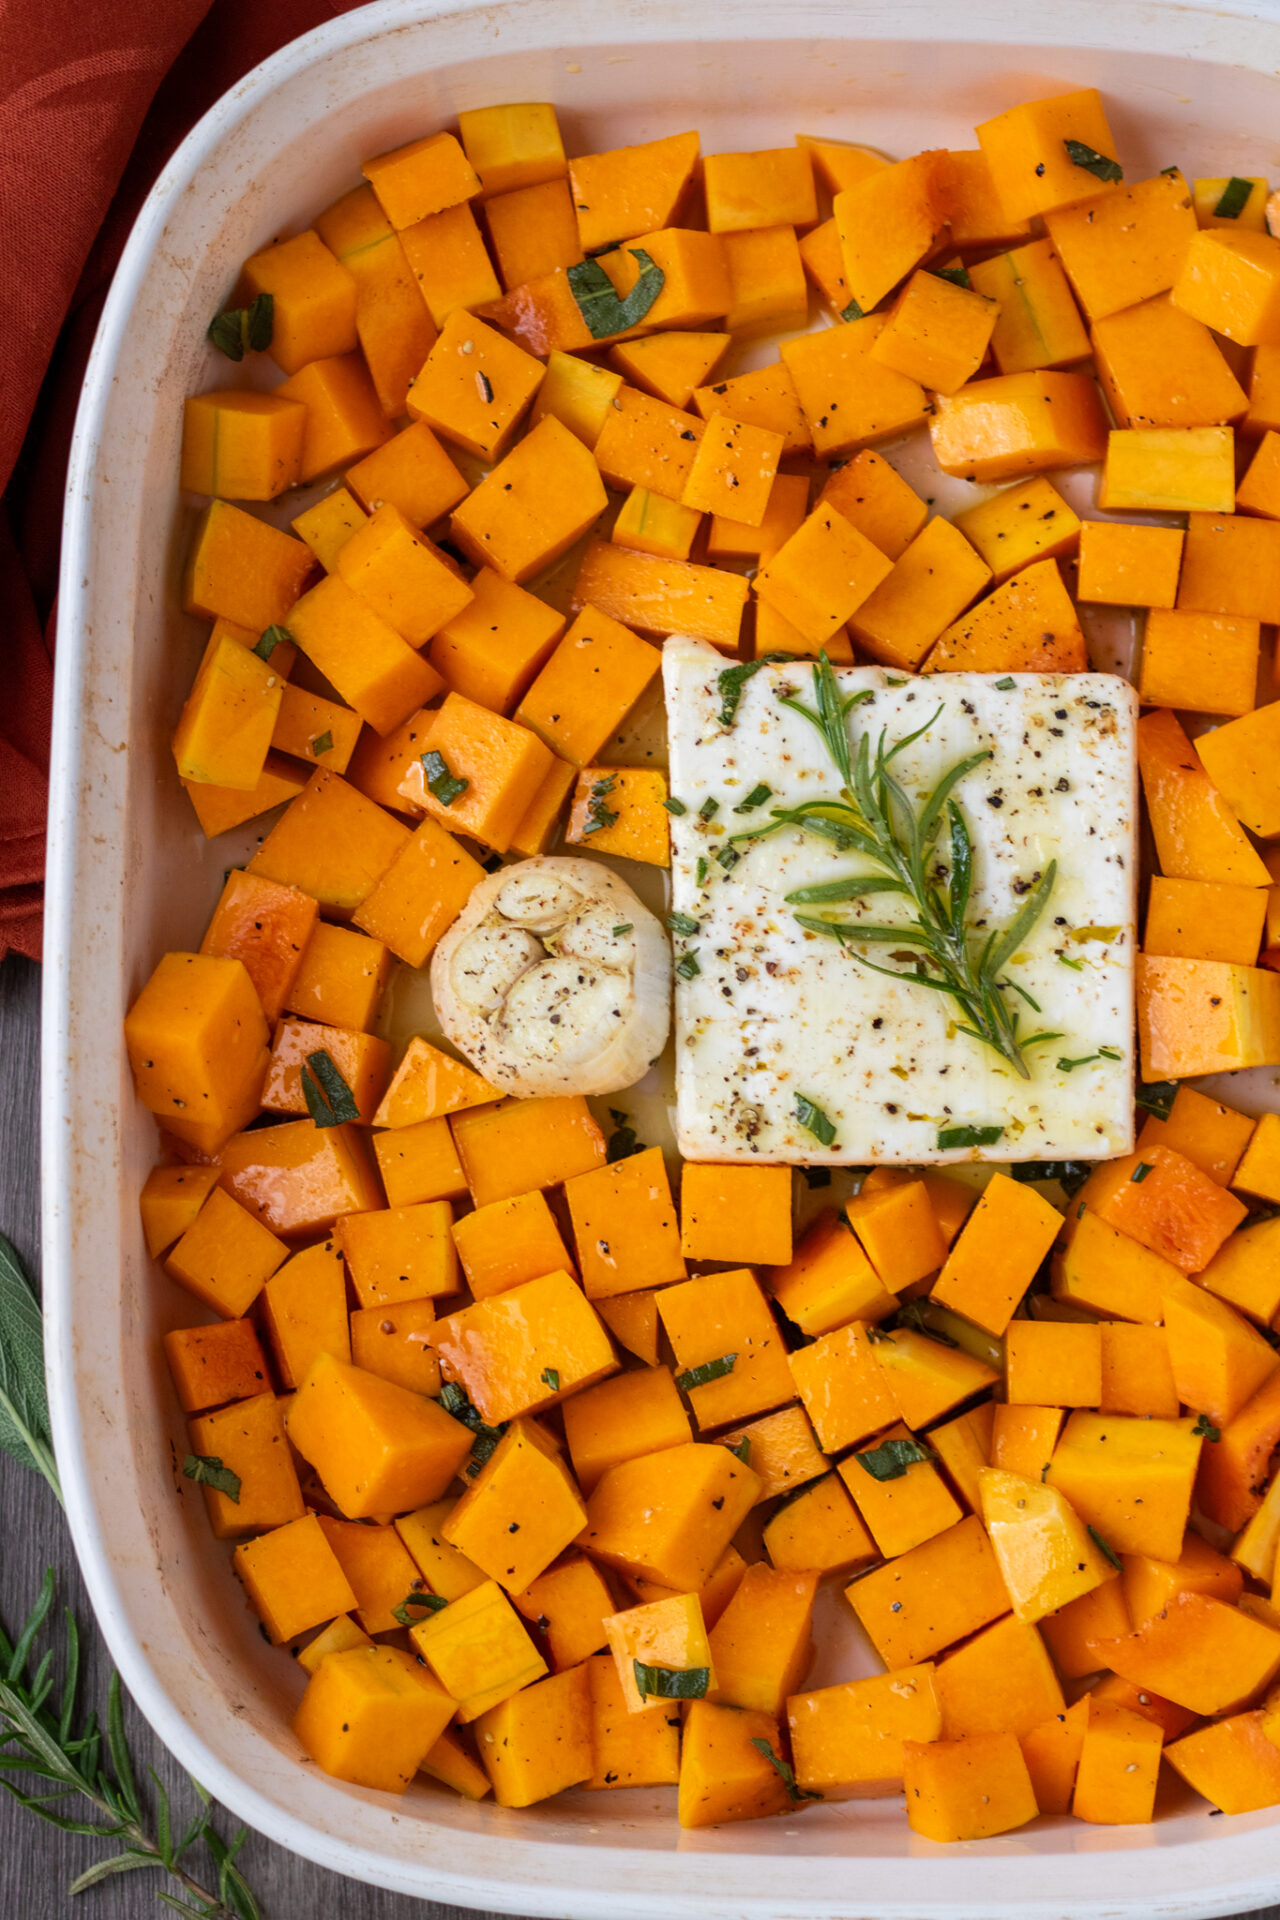 A large white baking dish filled with cubed butternut squash and a block of feta cheese in the middle. There's a whole head of garlic and a rosemary sprig.